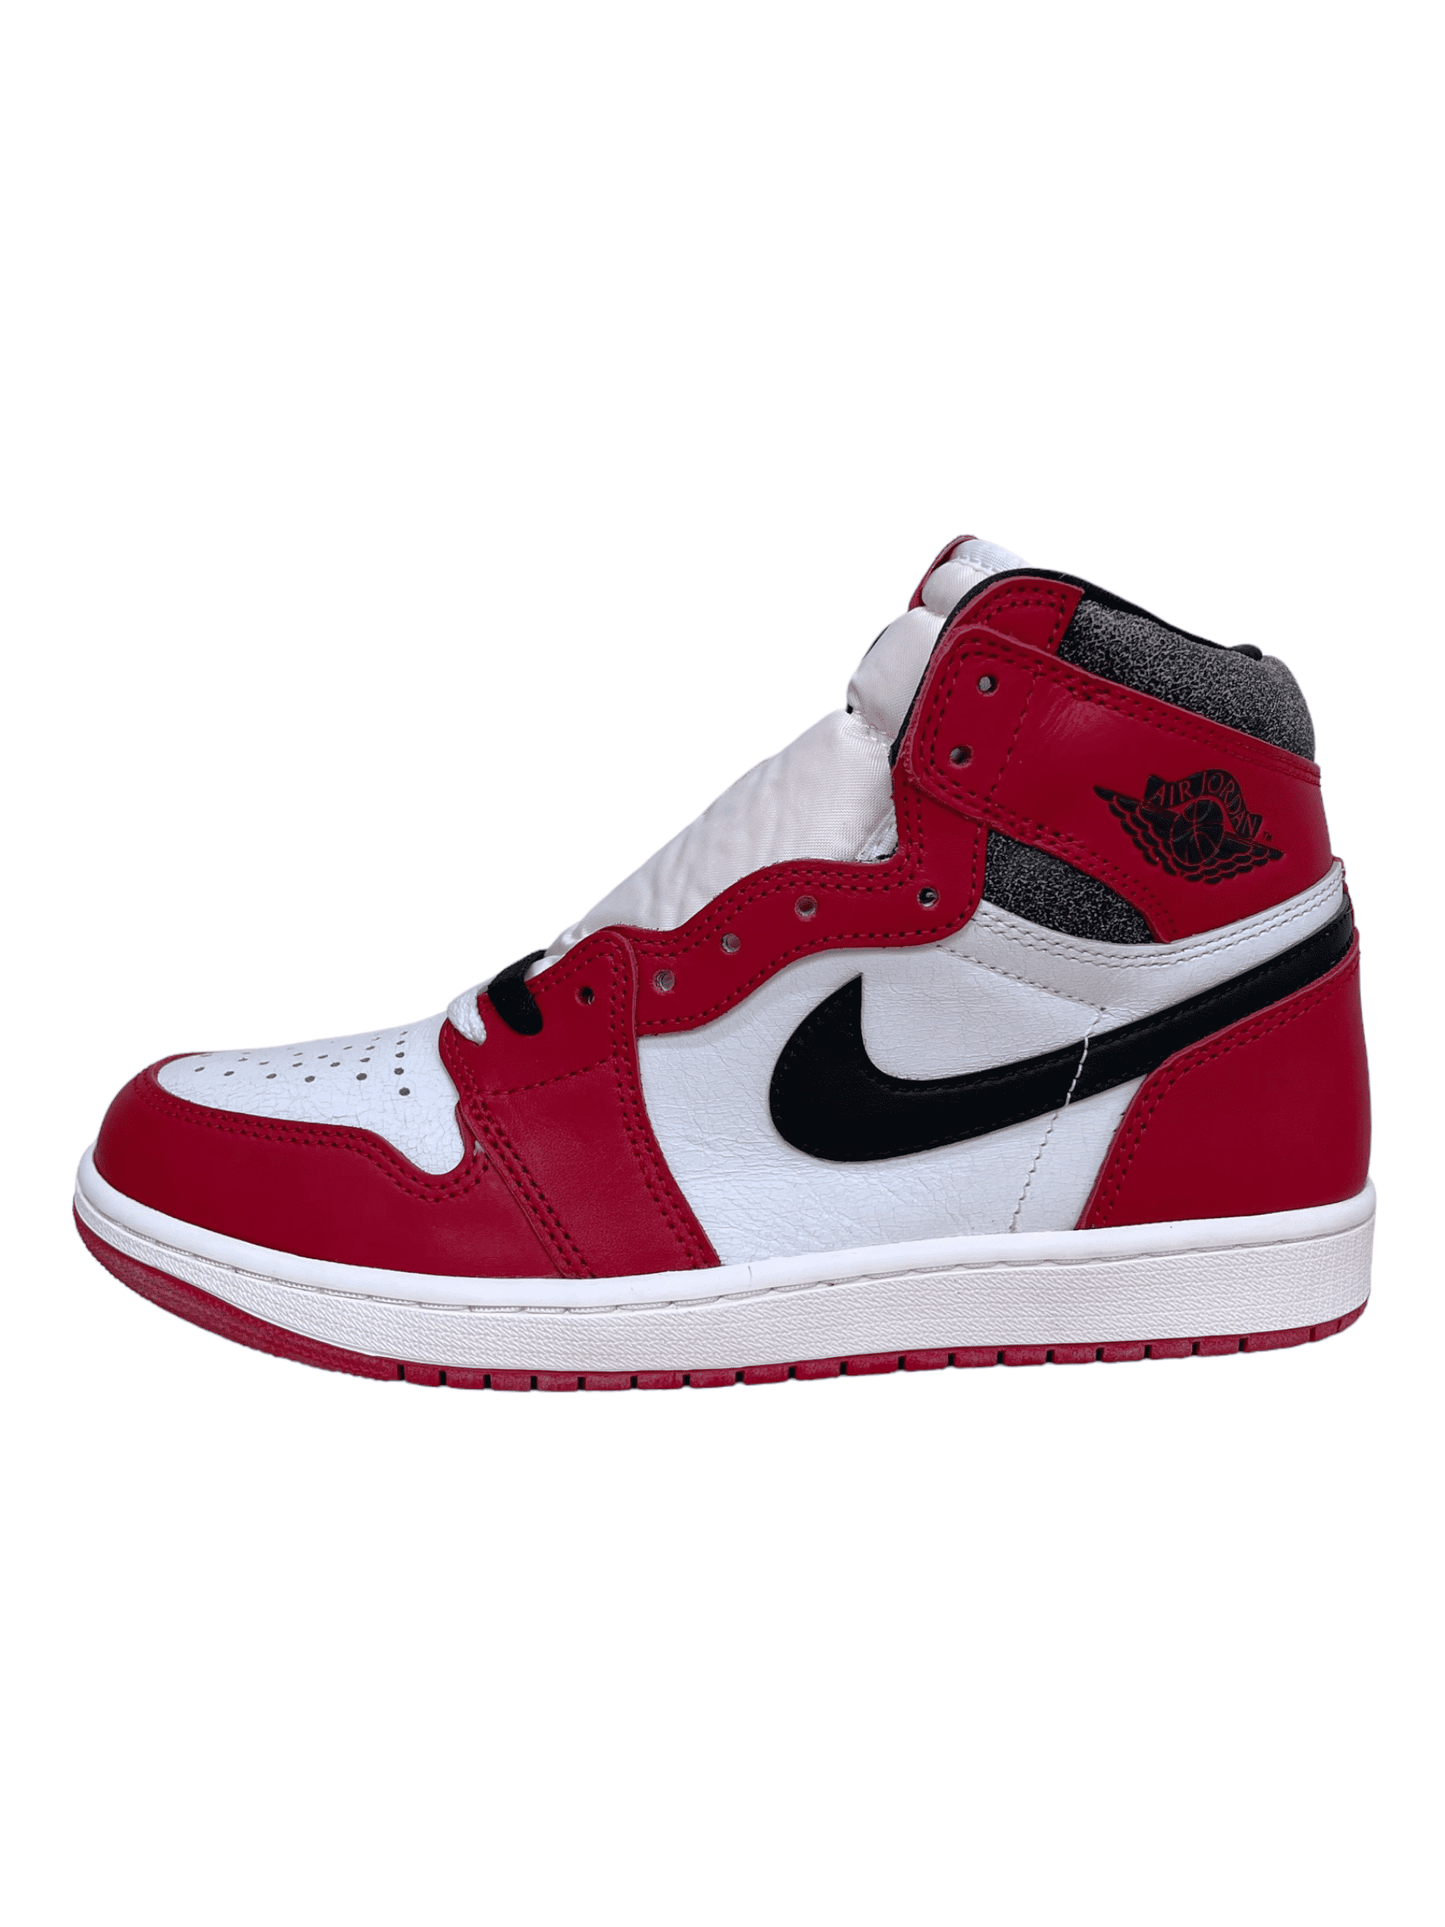 Nike Air Jordan 1 Retro High OG Chicago Lost and Found - Genuine Design Luxury Consignment for Men. New & Pre-Owned Clothing, Shoes, & Accessories. Calgary, Canada